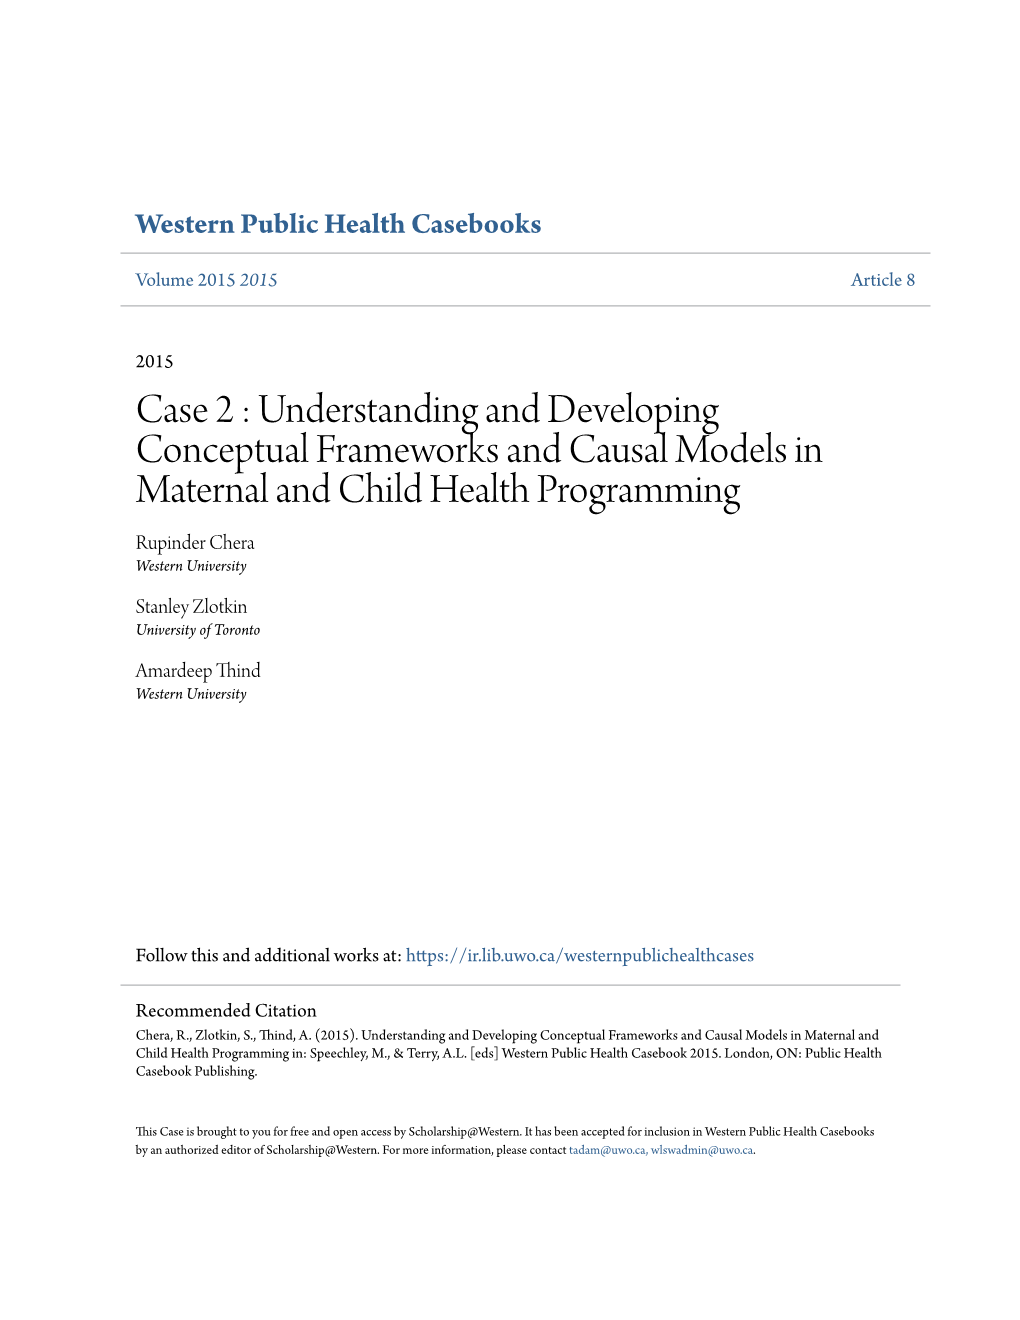 Case 2 : Understanding and Developing Conceptual Frameworks and Causal Models in Maternal and Child Health Programming Rupinder Chera Western University